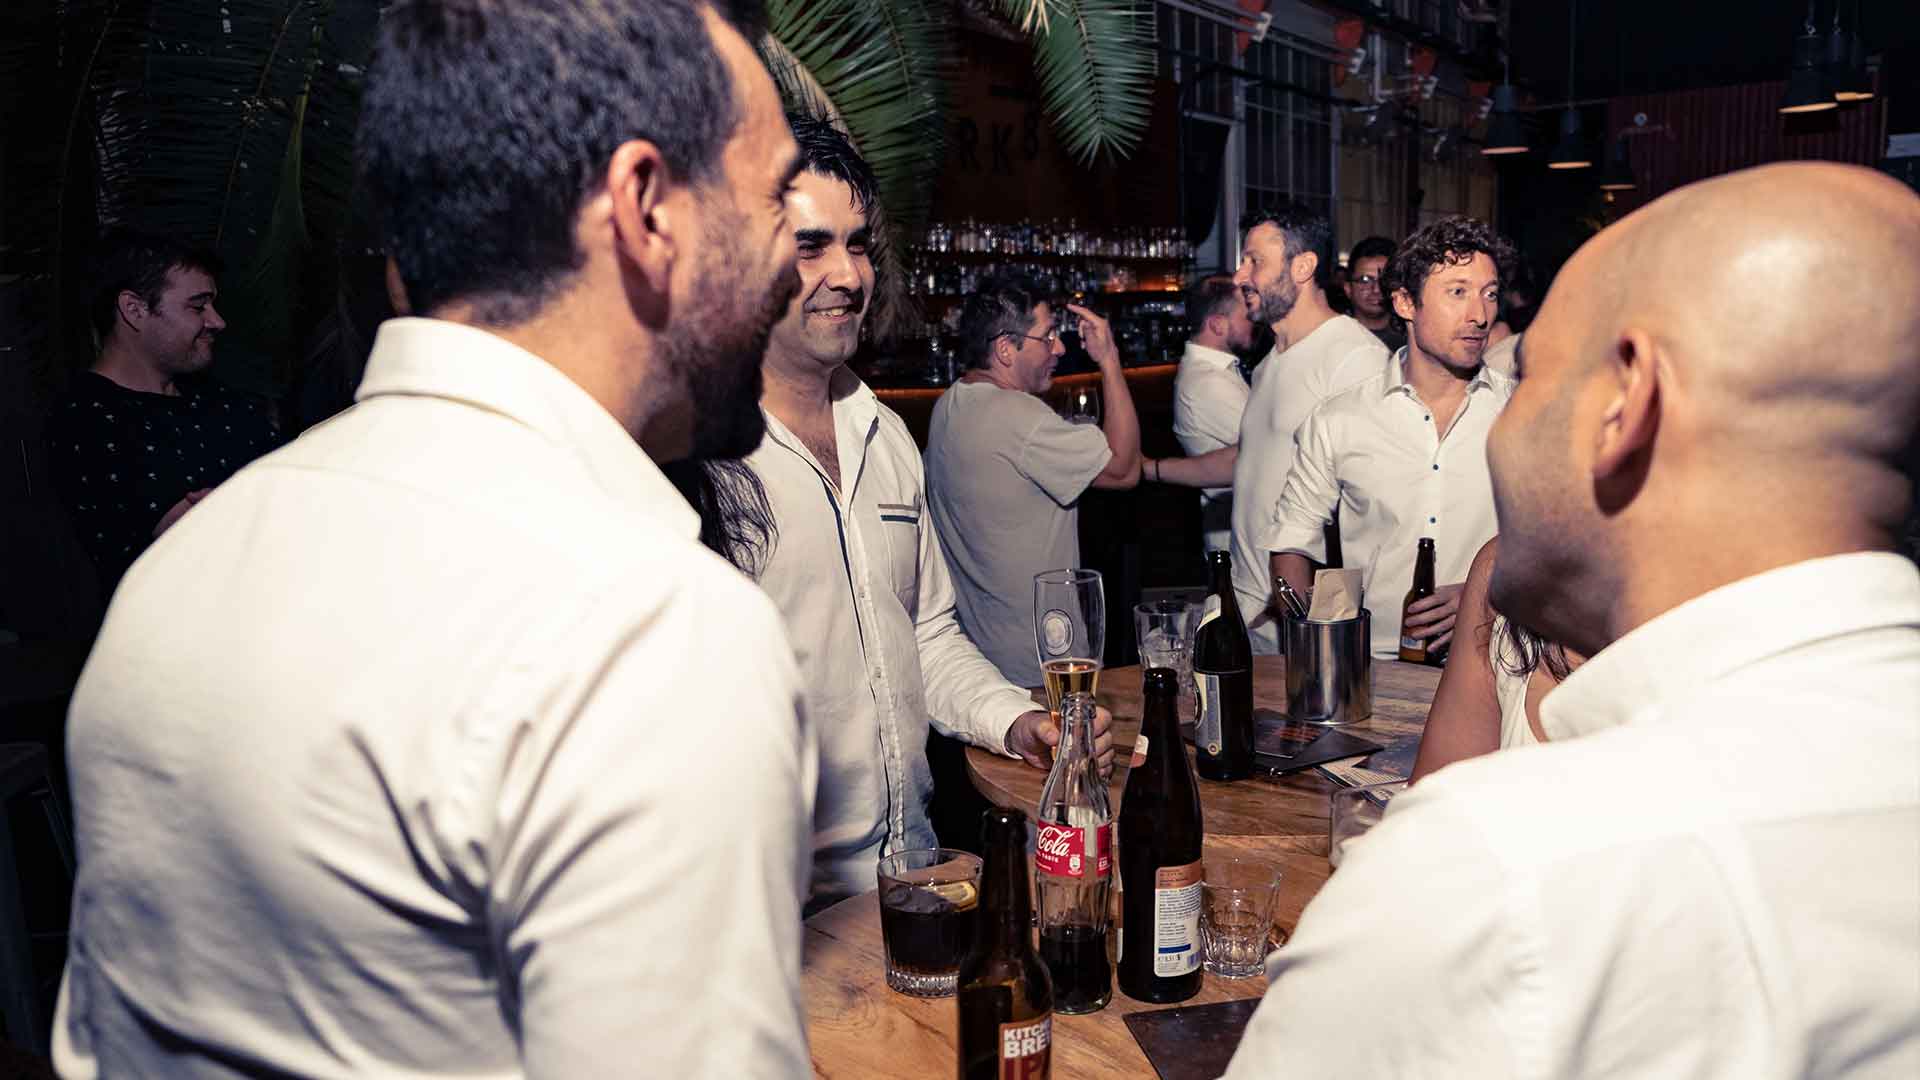 Group of people enjoying a lively conversation at a casual bar gathering.